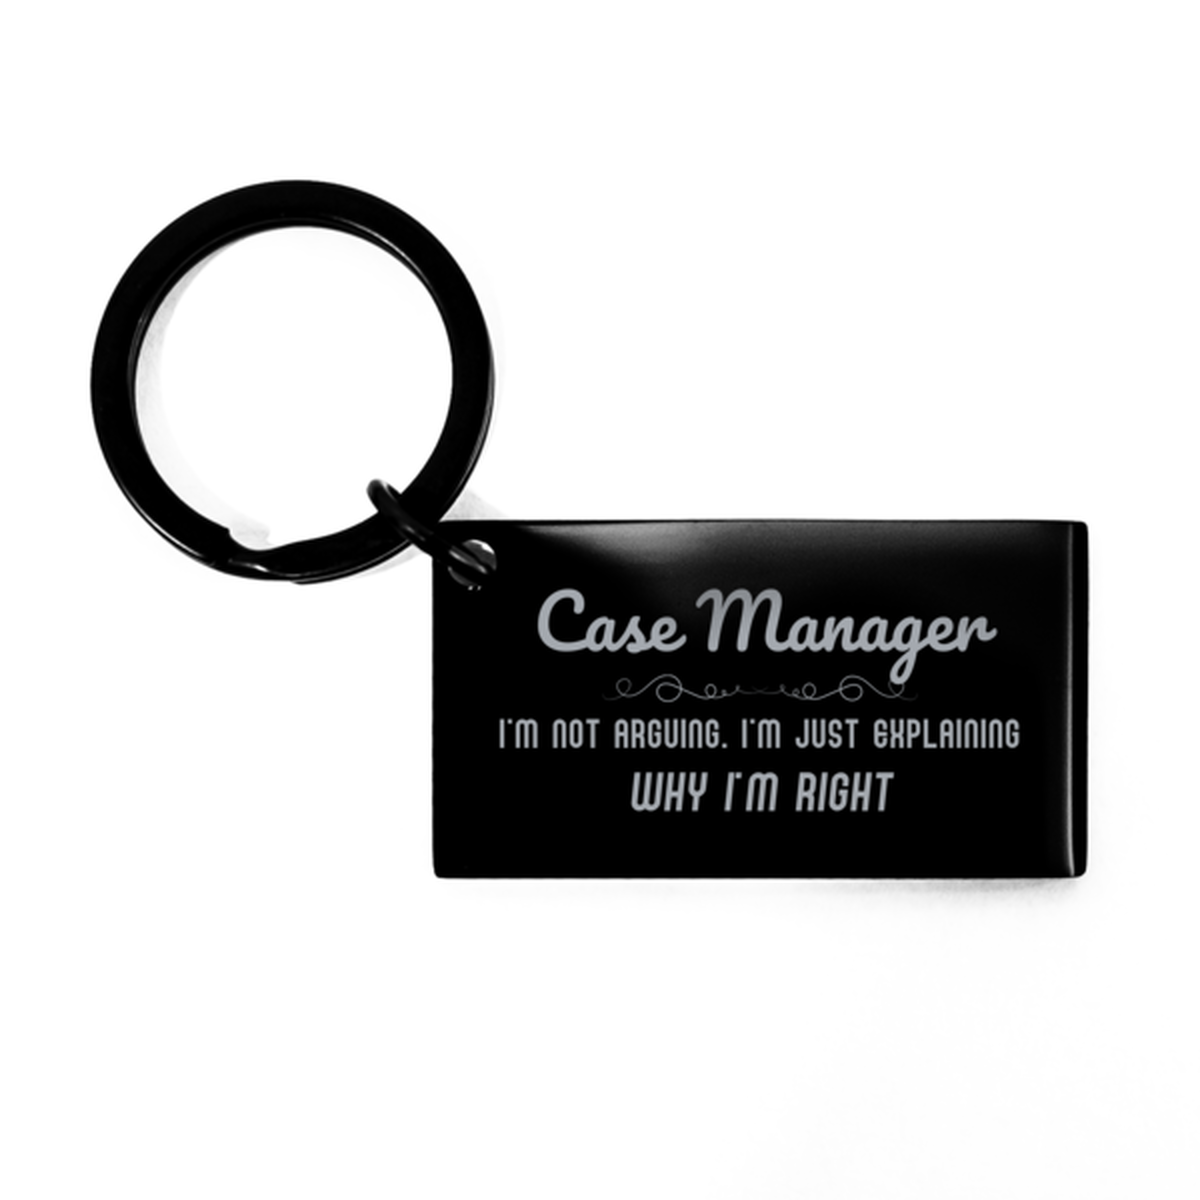 Case Manager I'm not Arguing. I'm Just Explaining Why I'm RIGHT Keychain, Funny Saying Quote Case Manager Gifts For Case Manager Graduation Birthday Christmas Gifts for Men Women Coworker